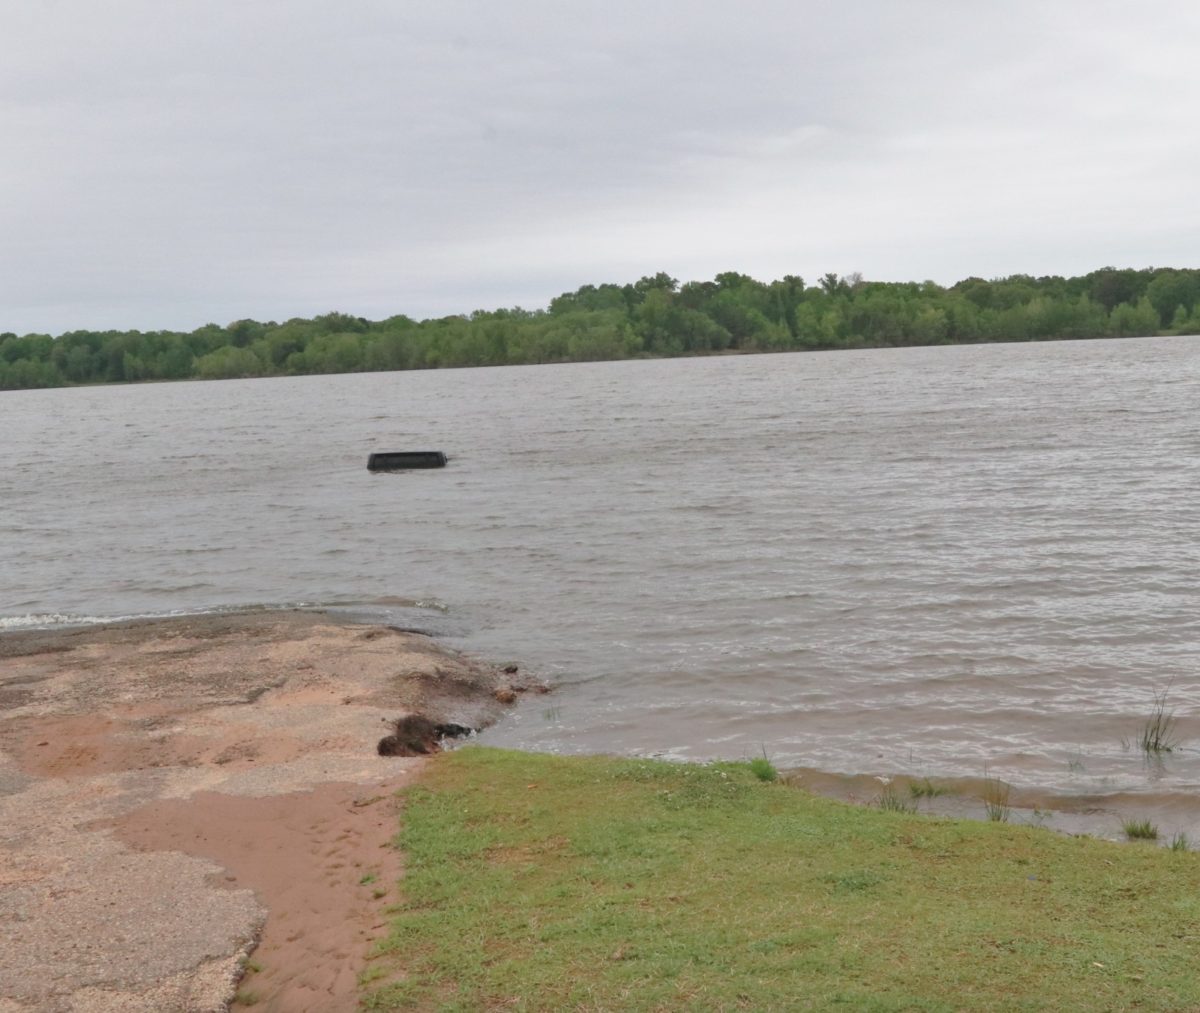 Fisherman Miraculously Finds Woman Trapped in Her Submerged Car | For two days, a woman from Marion County was missing. Now, many are saying it was God who put a fisherman in the right place at the right time.